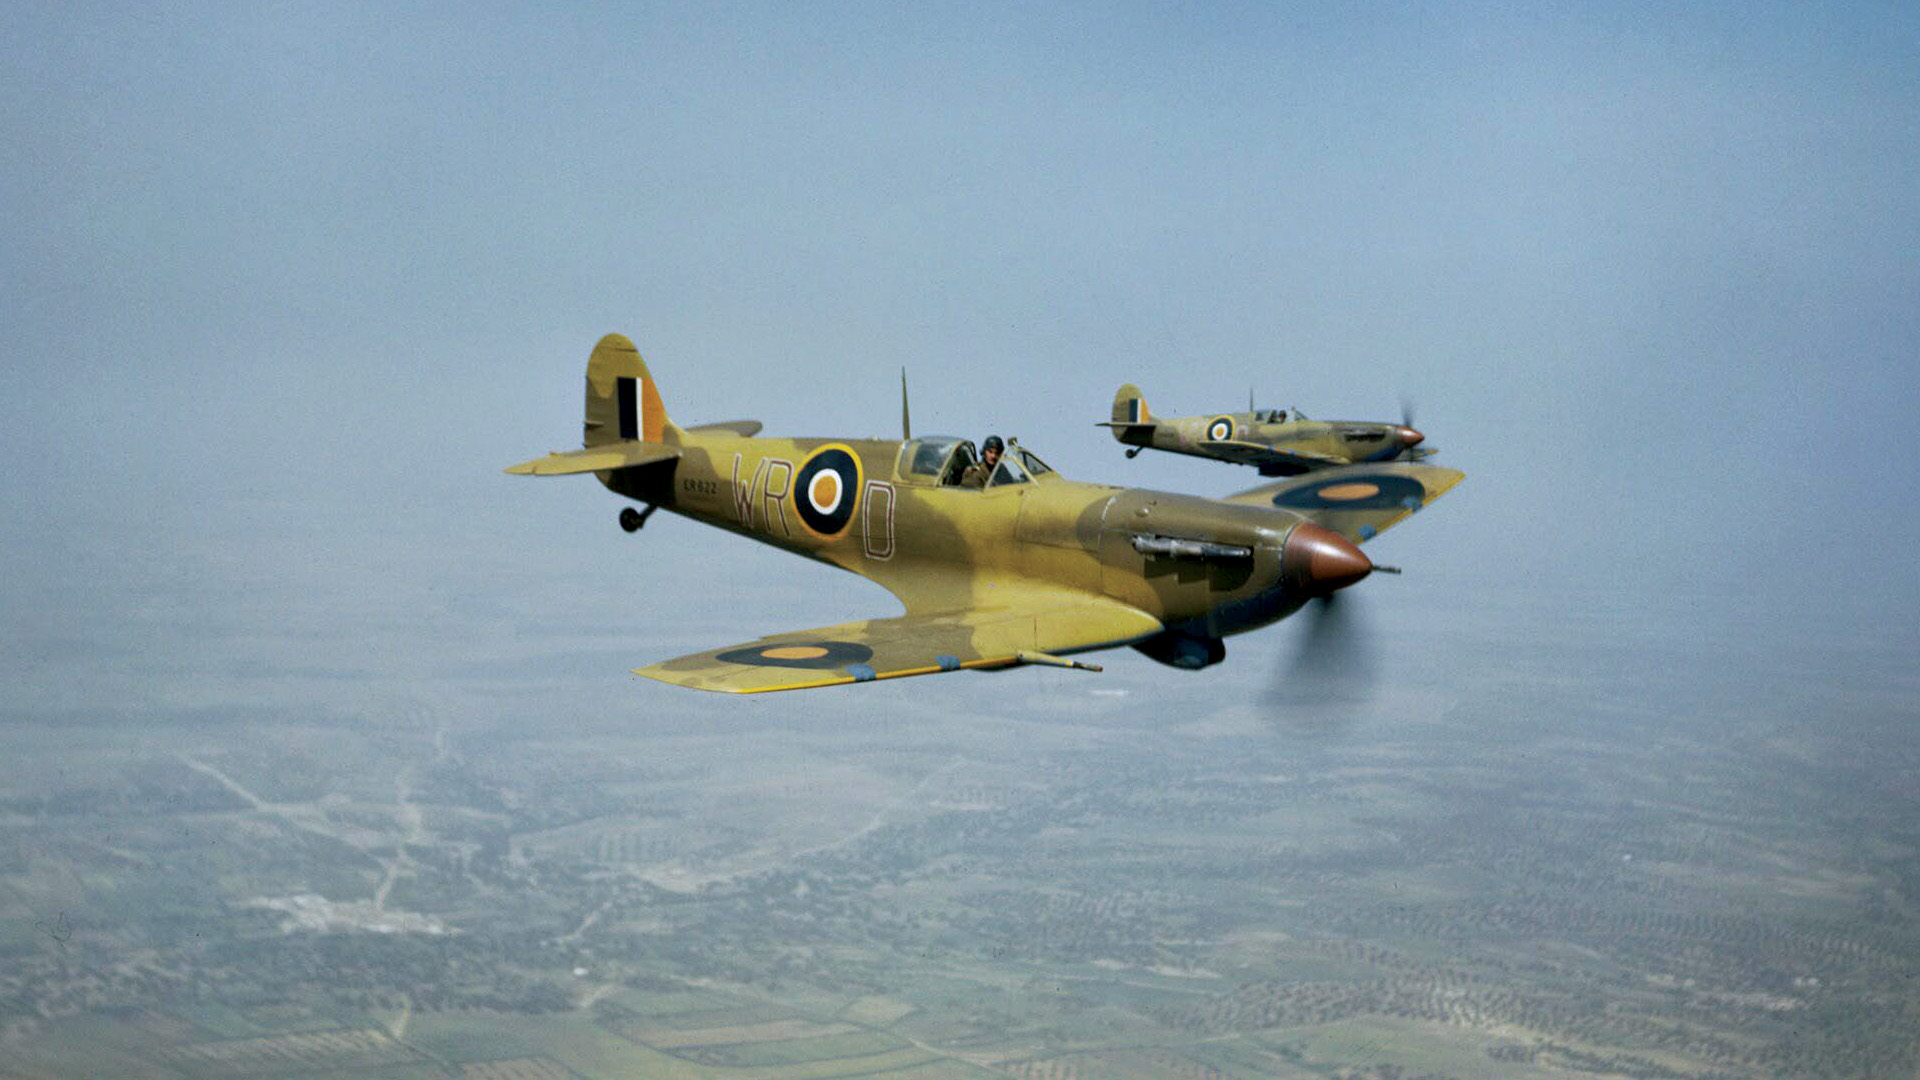 South African Spitfires based on Kos flew air cover for the British until the Germans captured the airfield. Throughout the campaign, the Luftwaffe continued to dominate the skies over the Eastern Mediterranean.